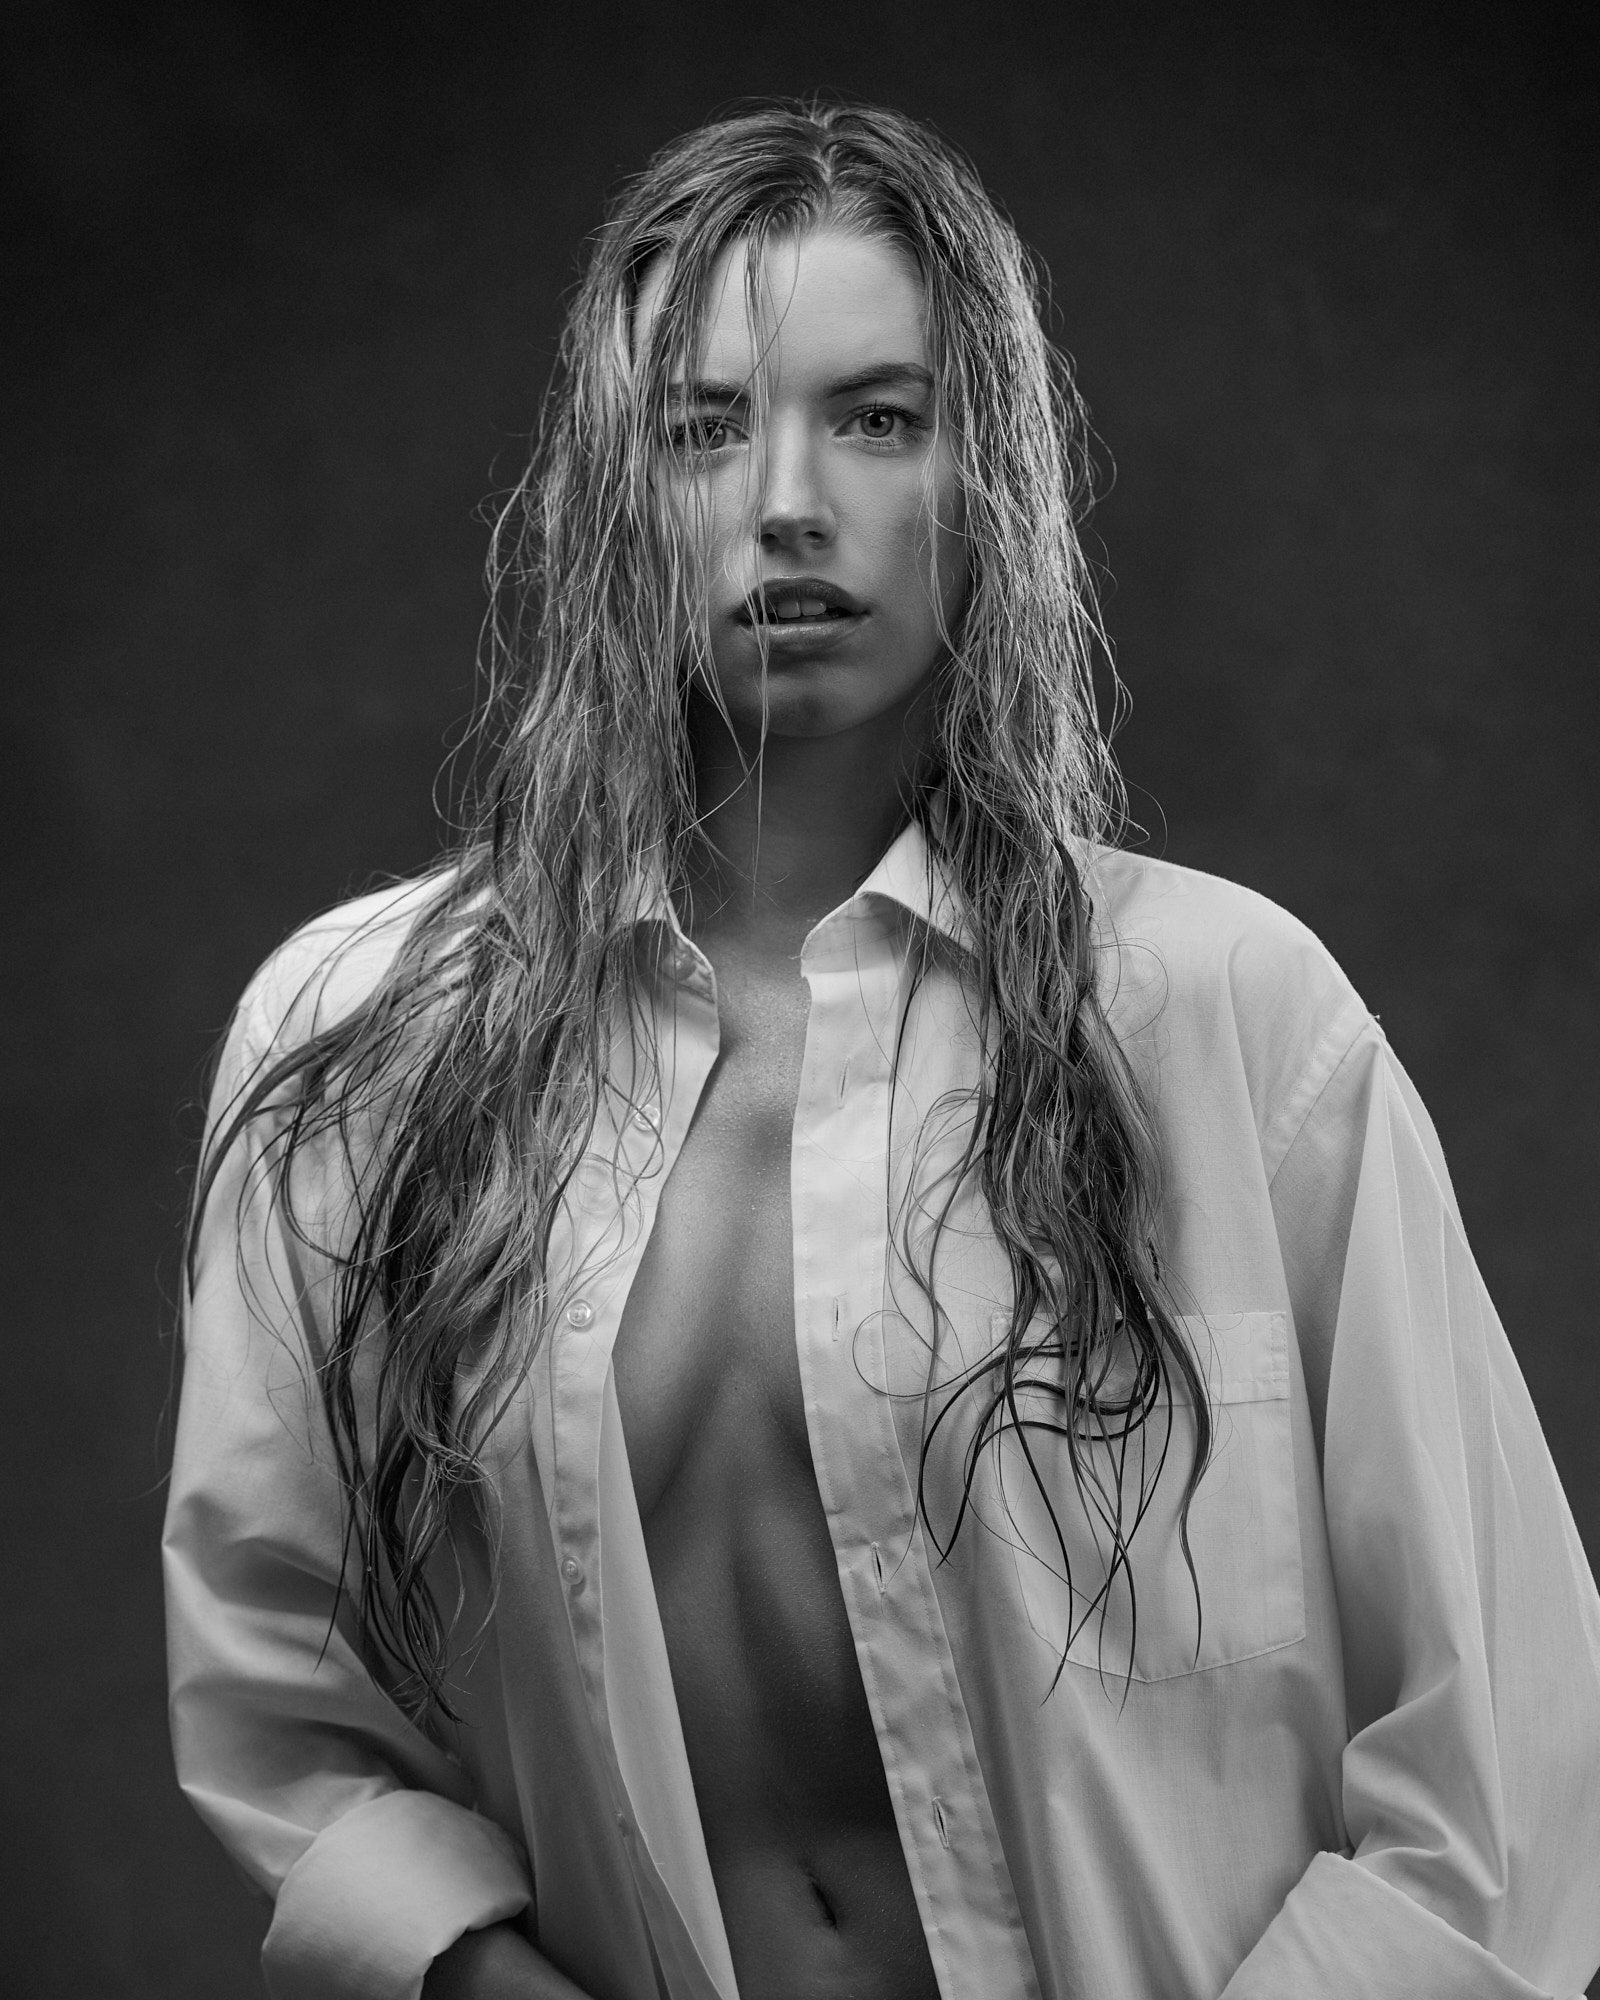 Black & White portrait in a wet look style